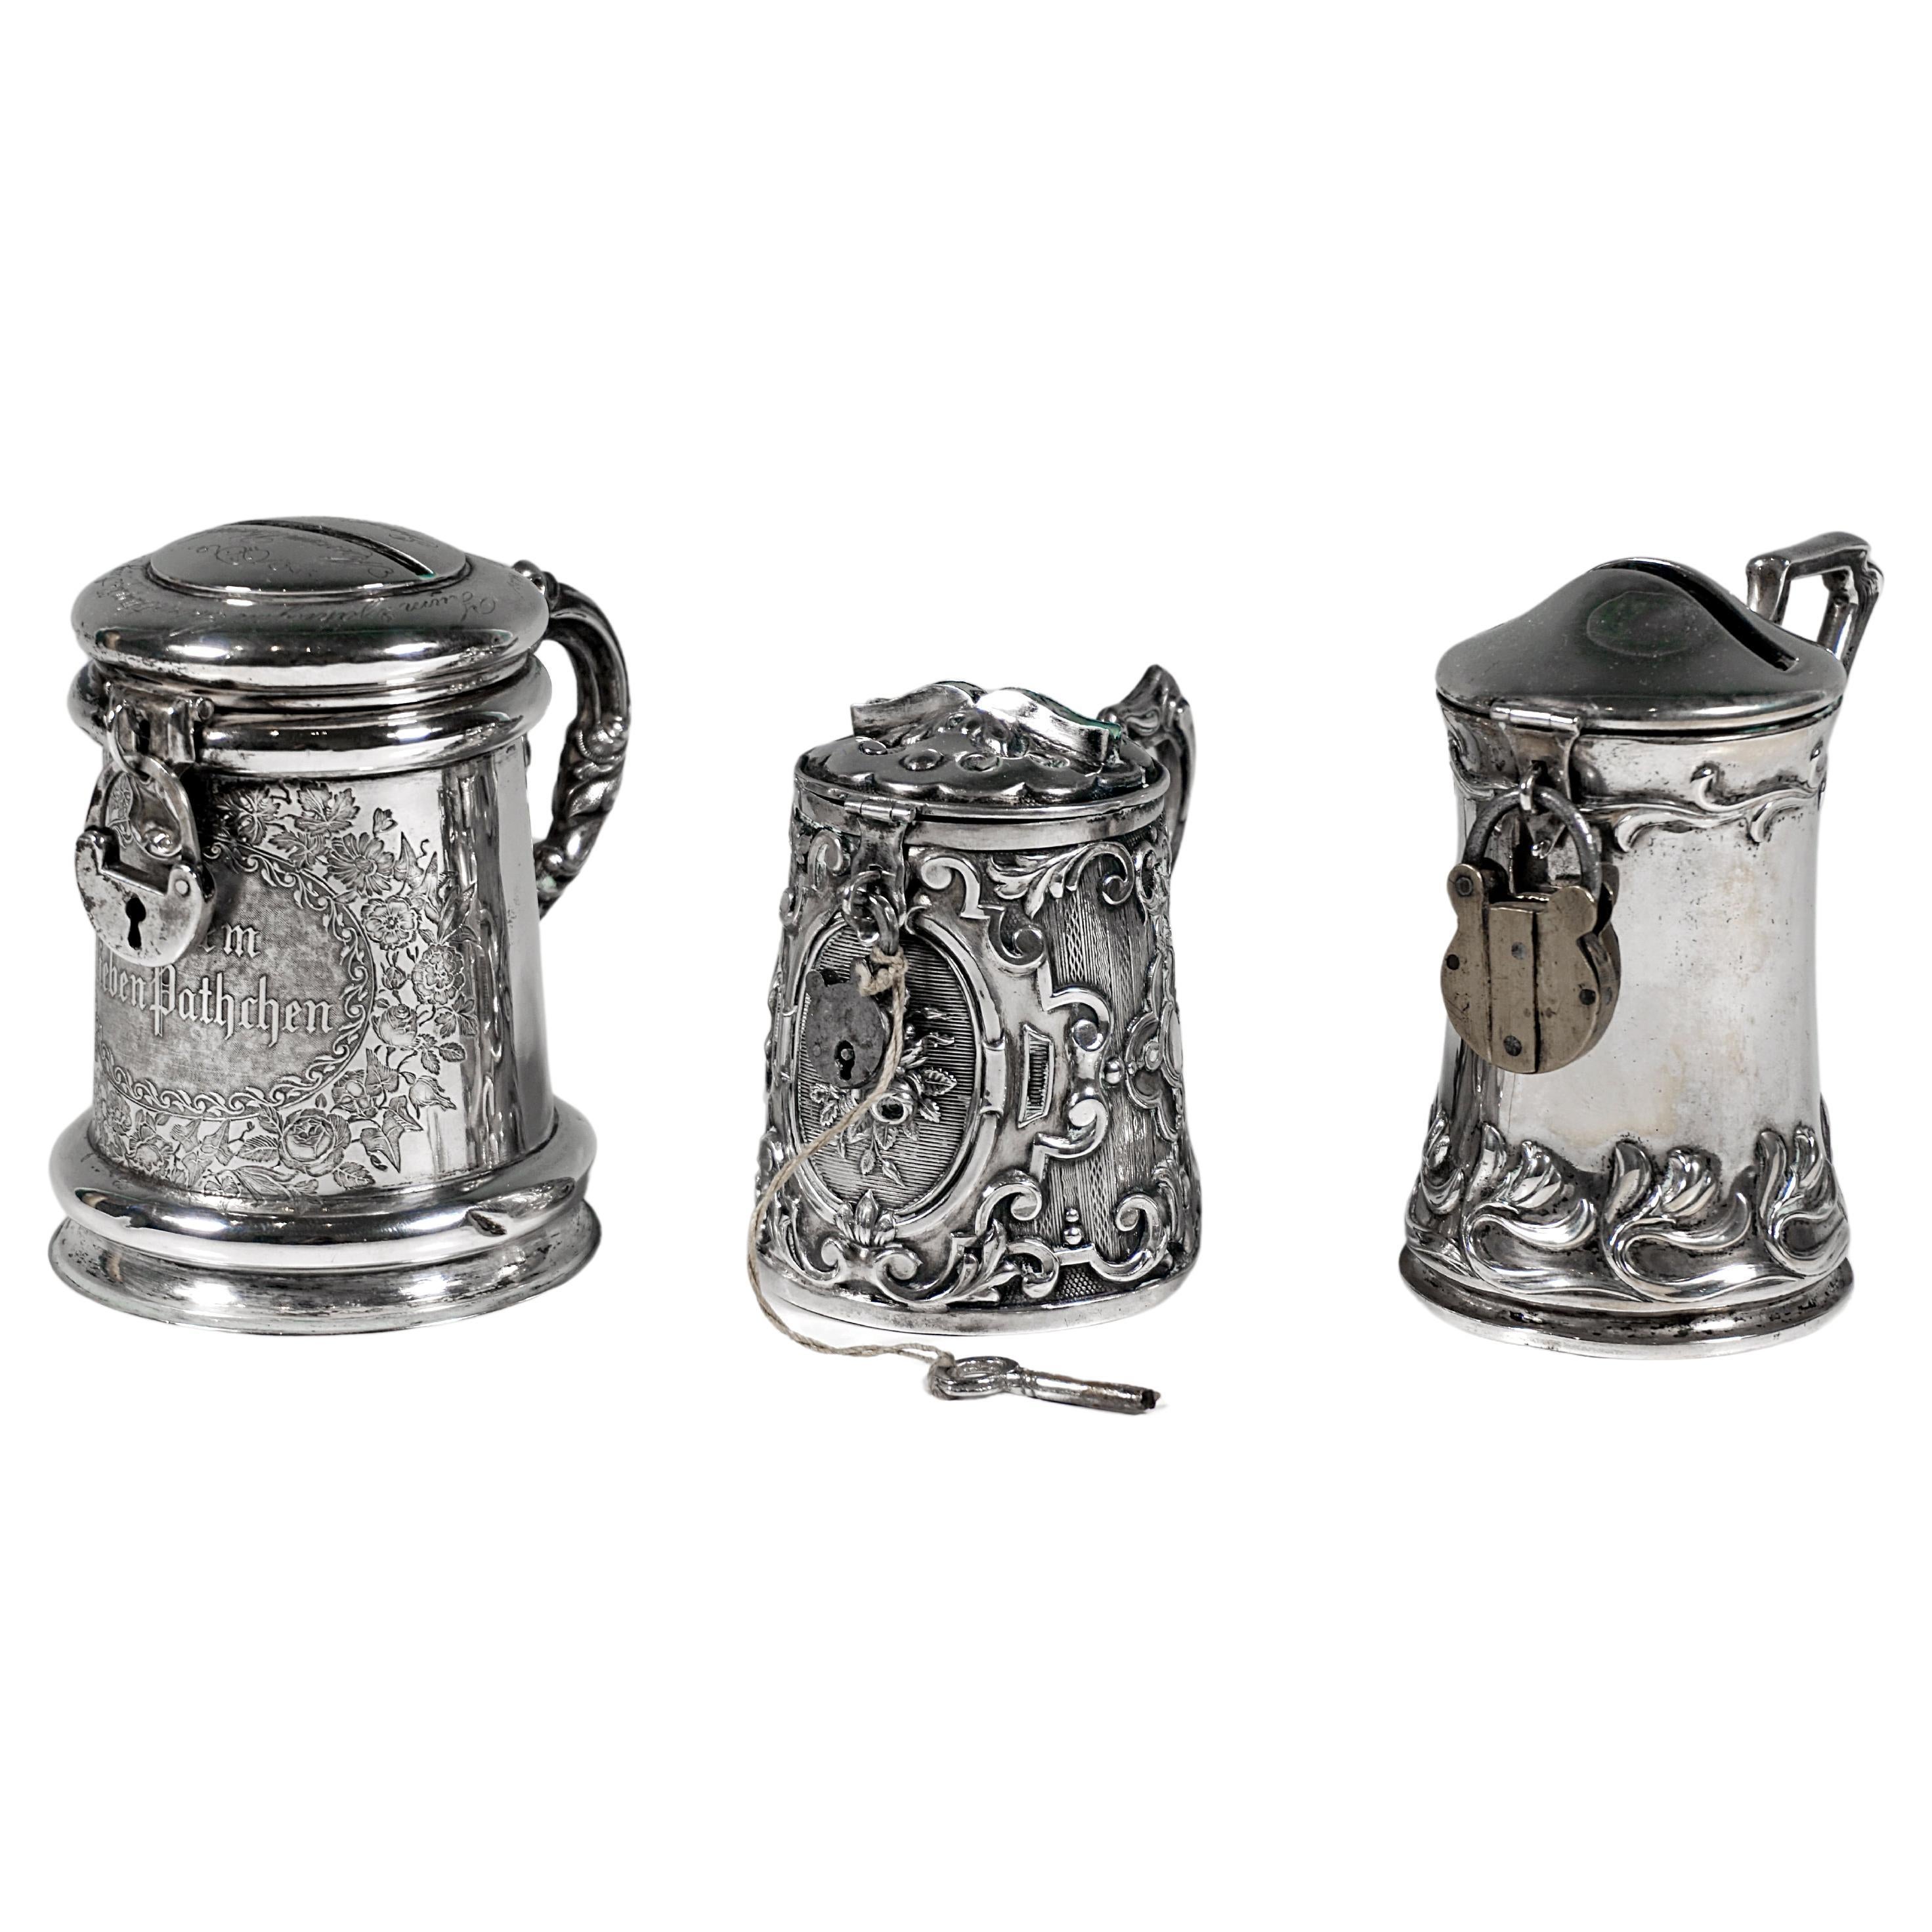 3 Antique Silver Money Boxes, Piggy Banks, Austria-Hungary & Germany, 19th Cent. For Sale